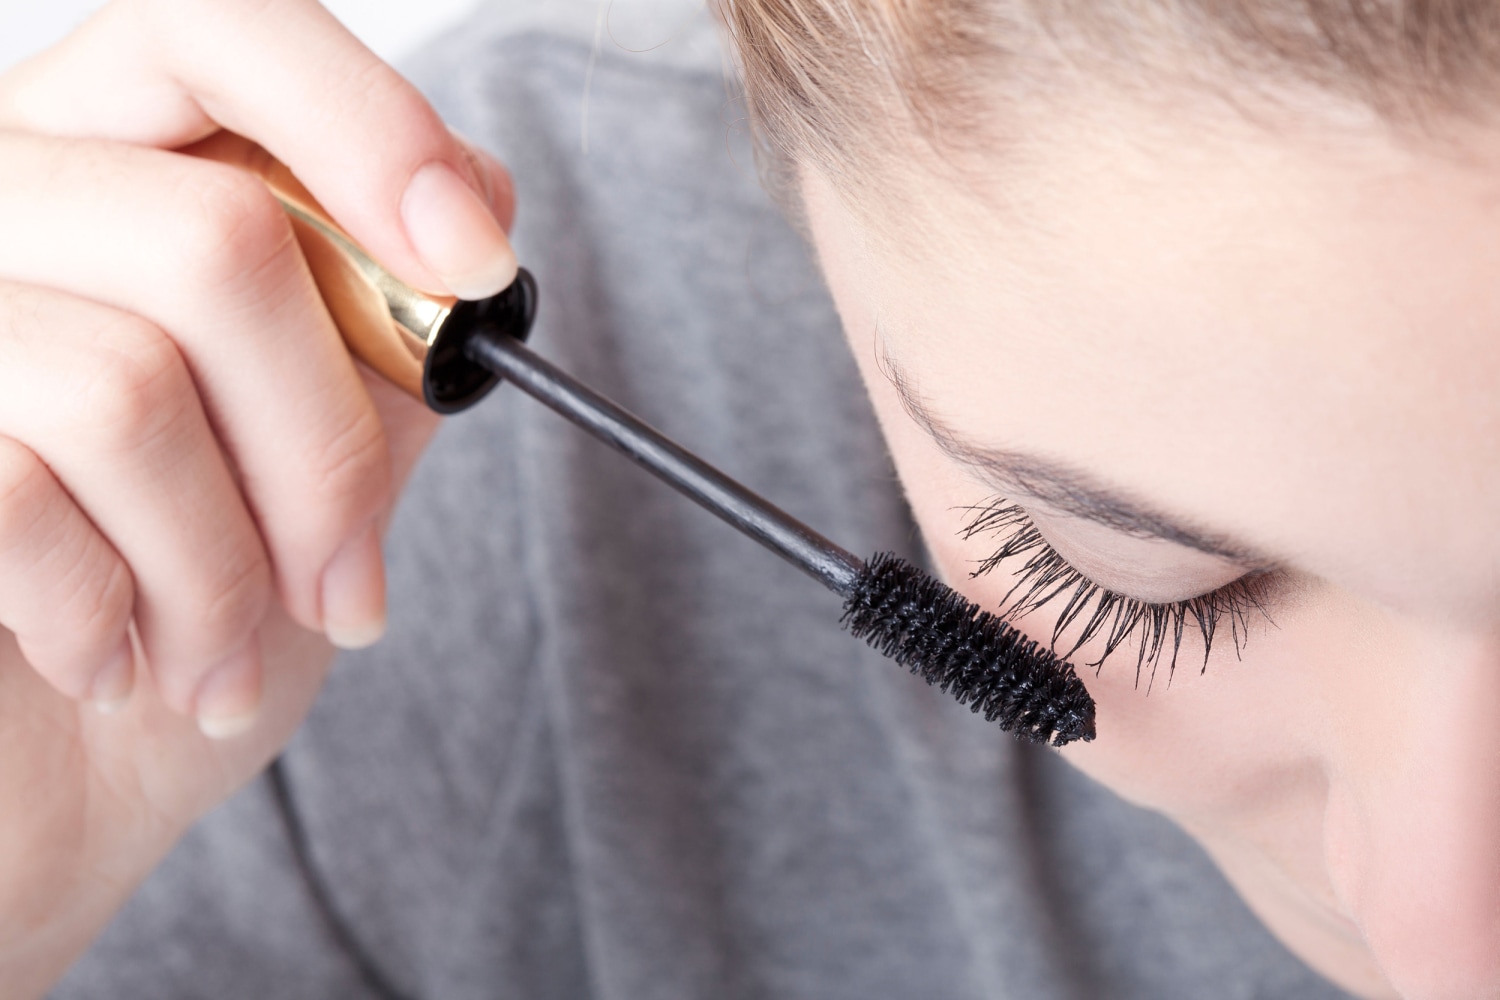 How to put mascara on, according to makeup artists